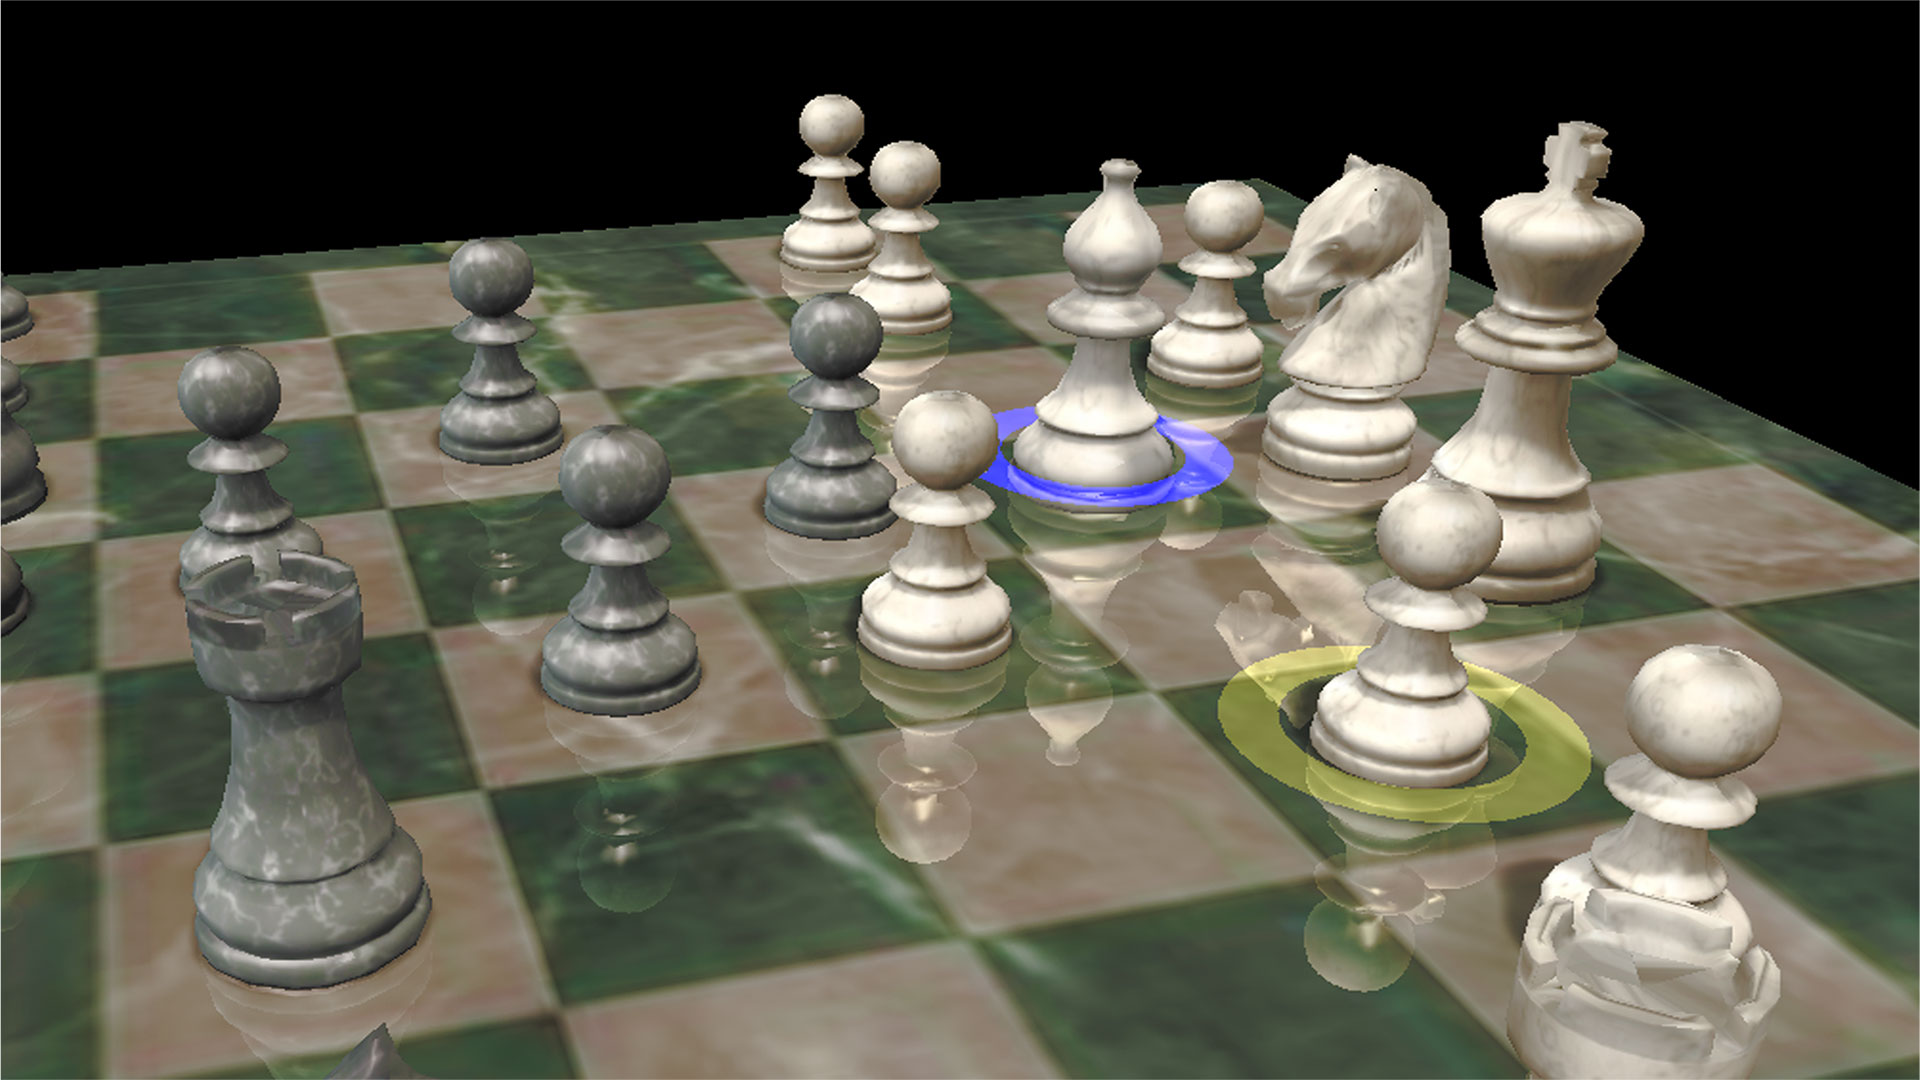 fritz chess 13 free download full version